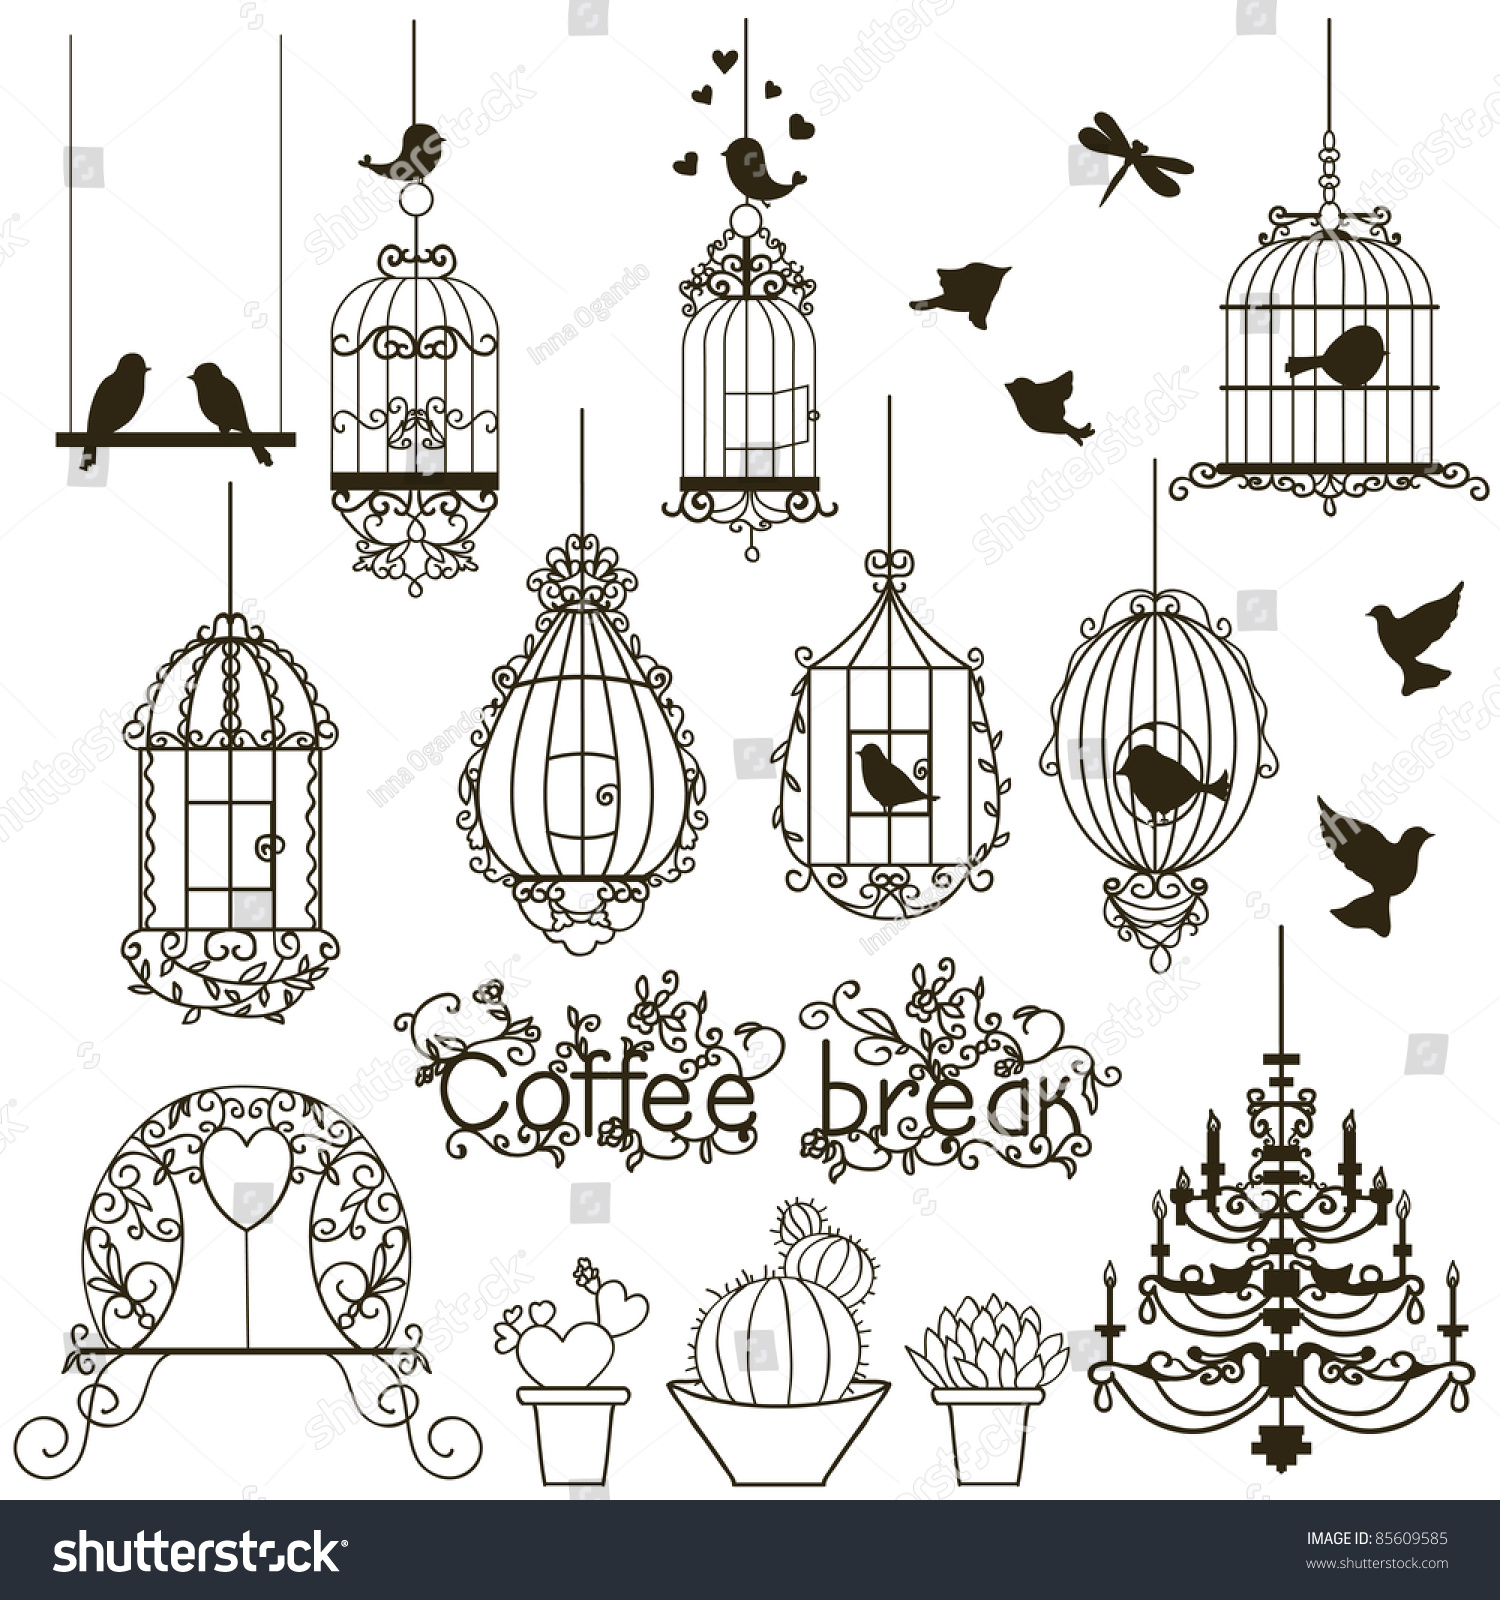 vector clipart collection download - photo #17